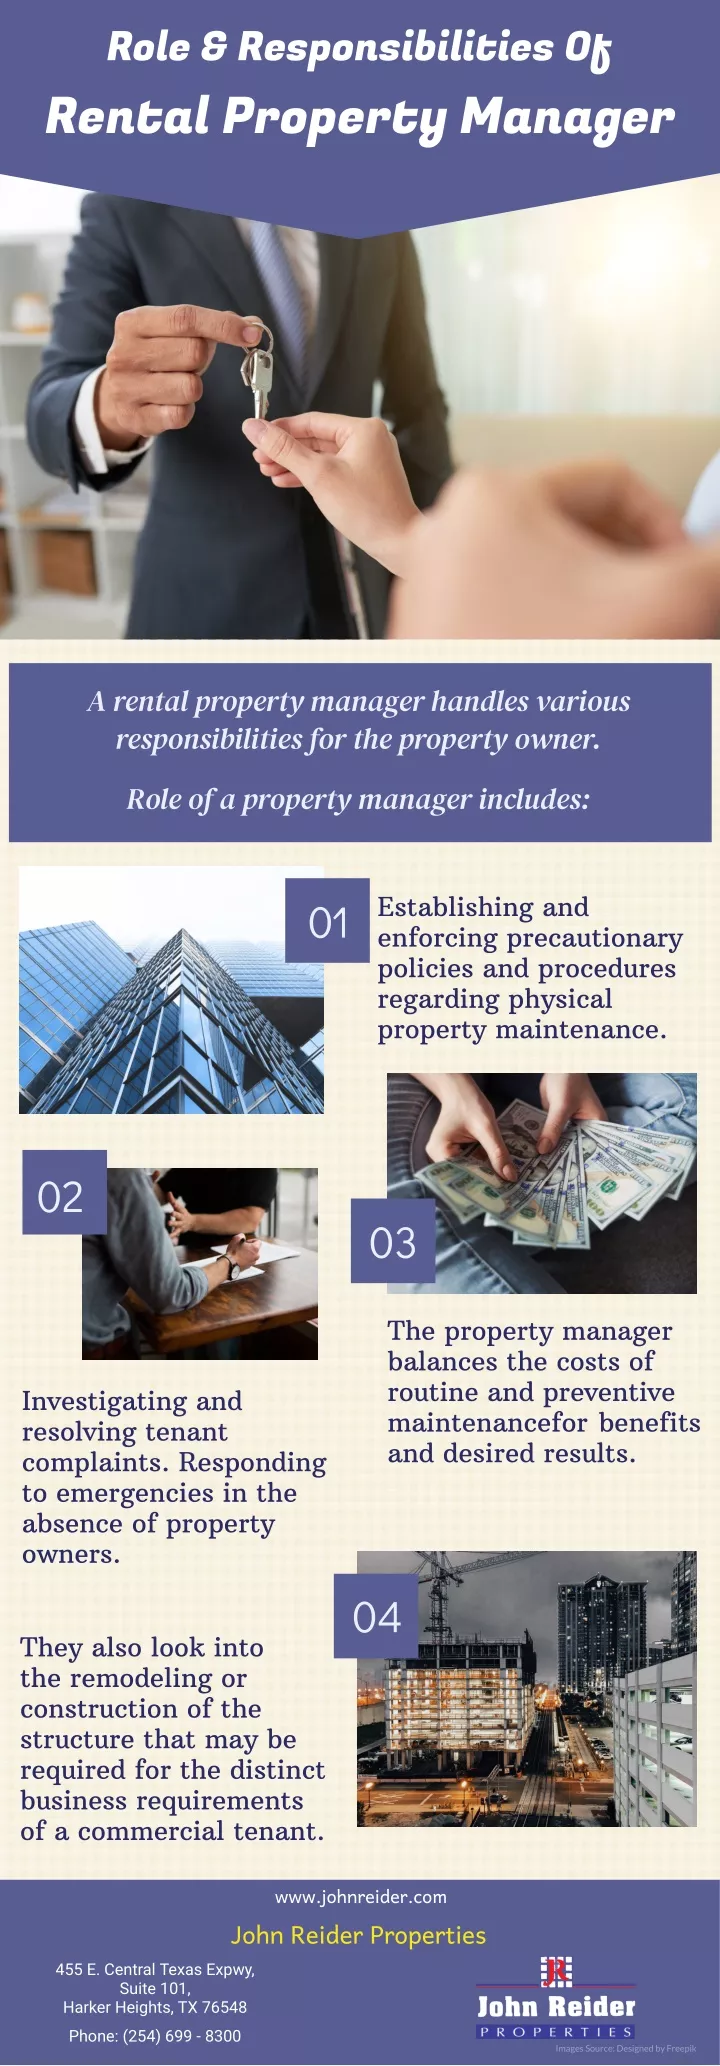 role responsibilities of rental property manager